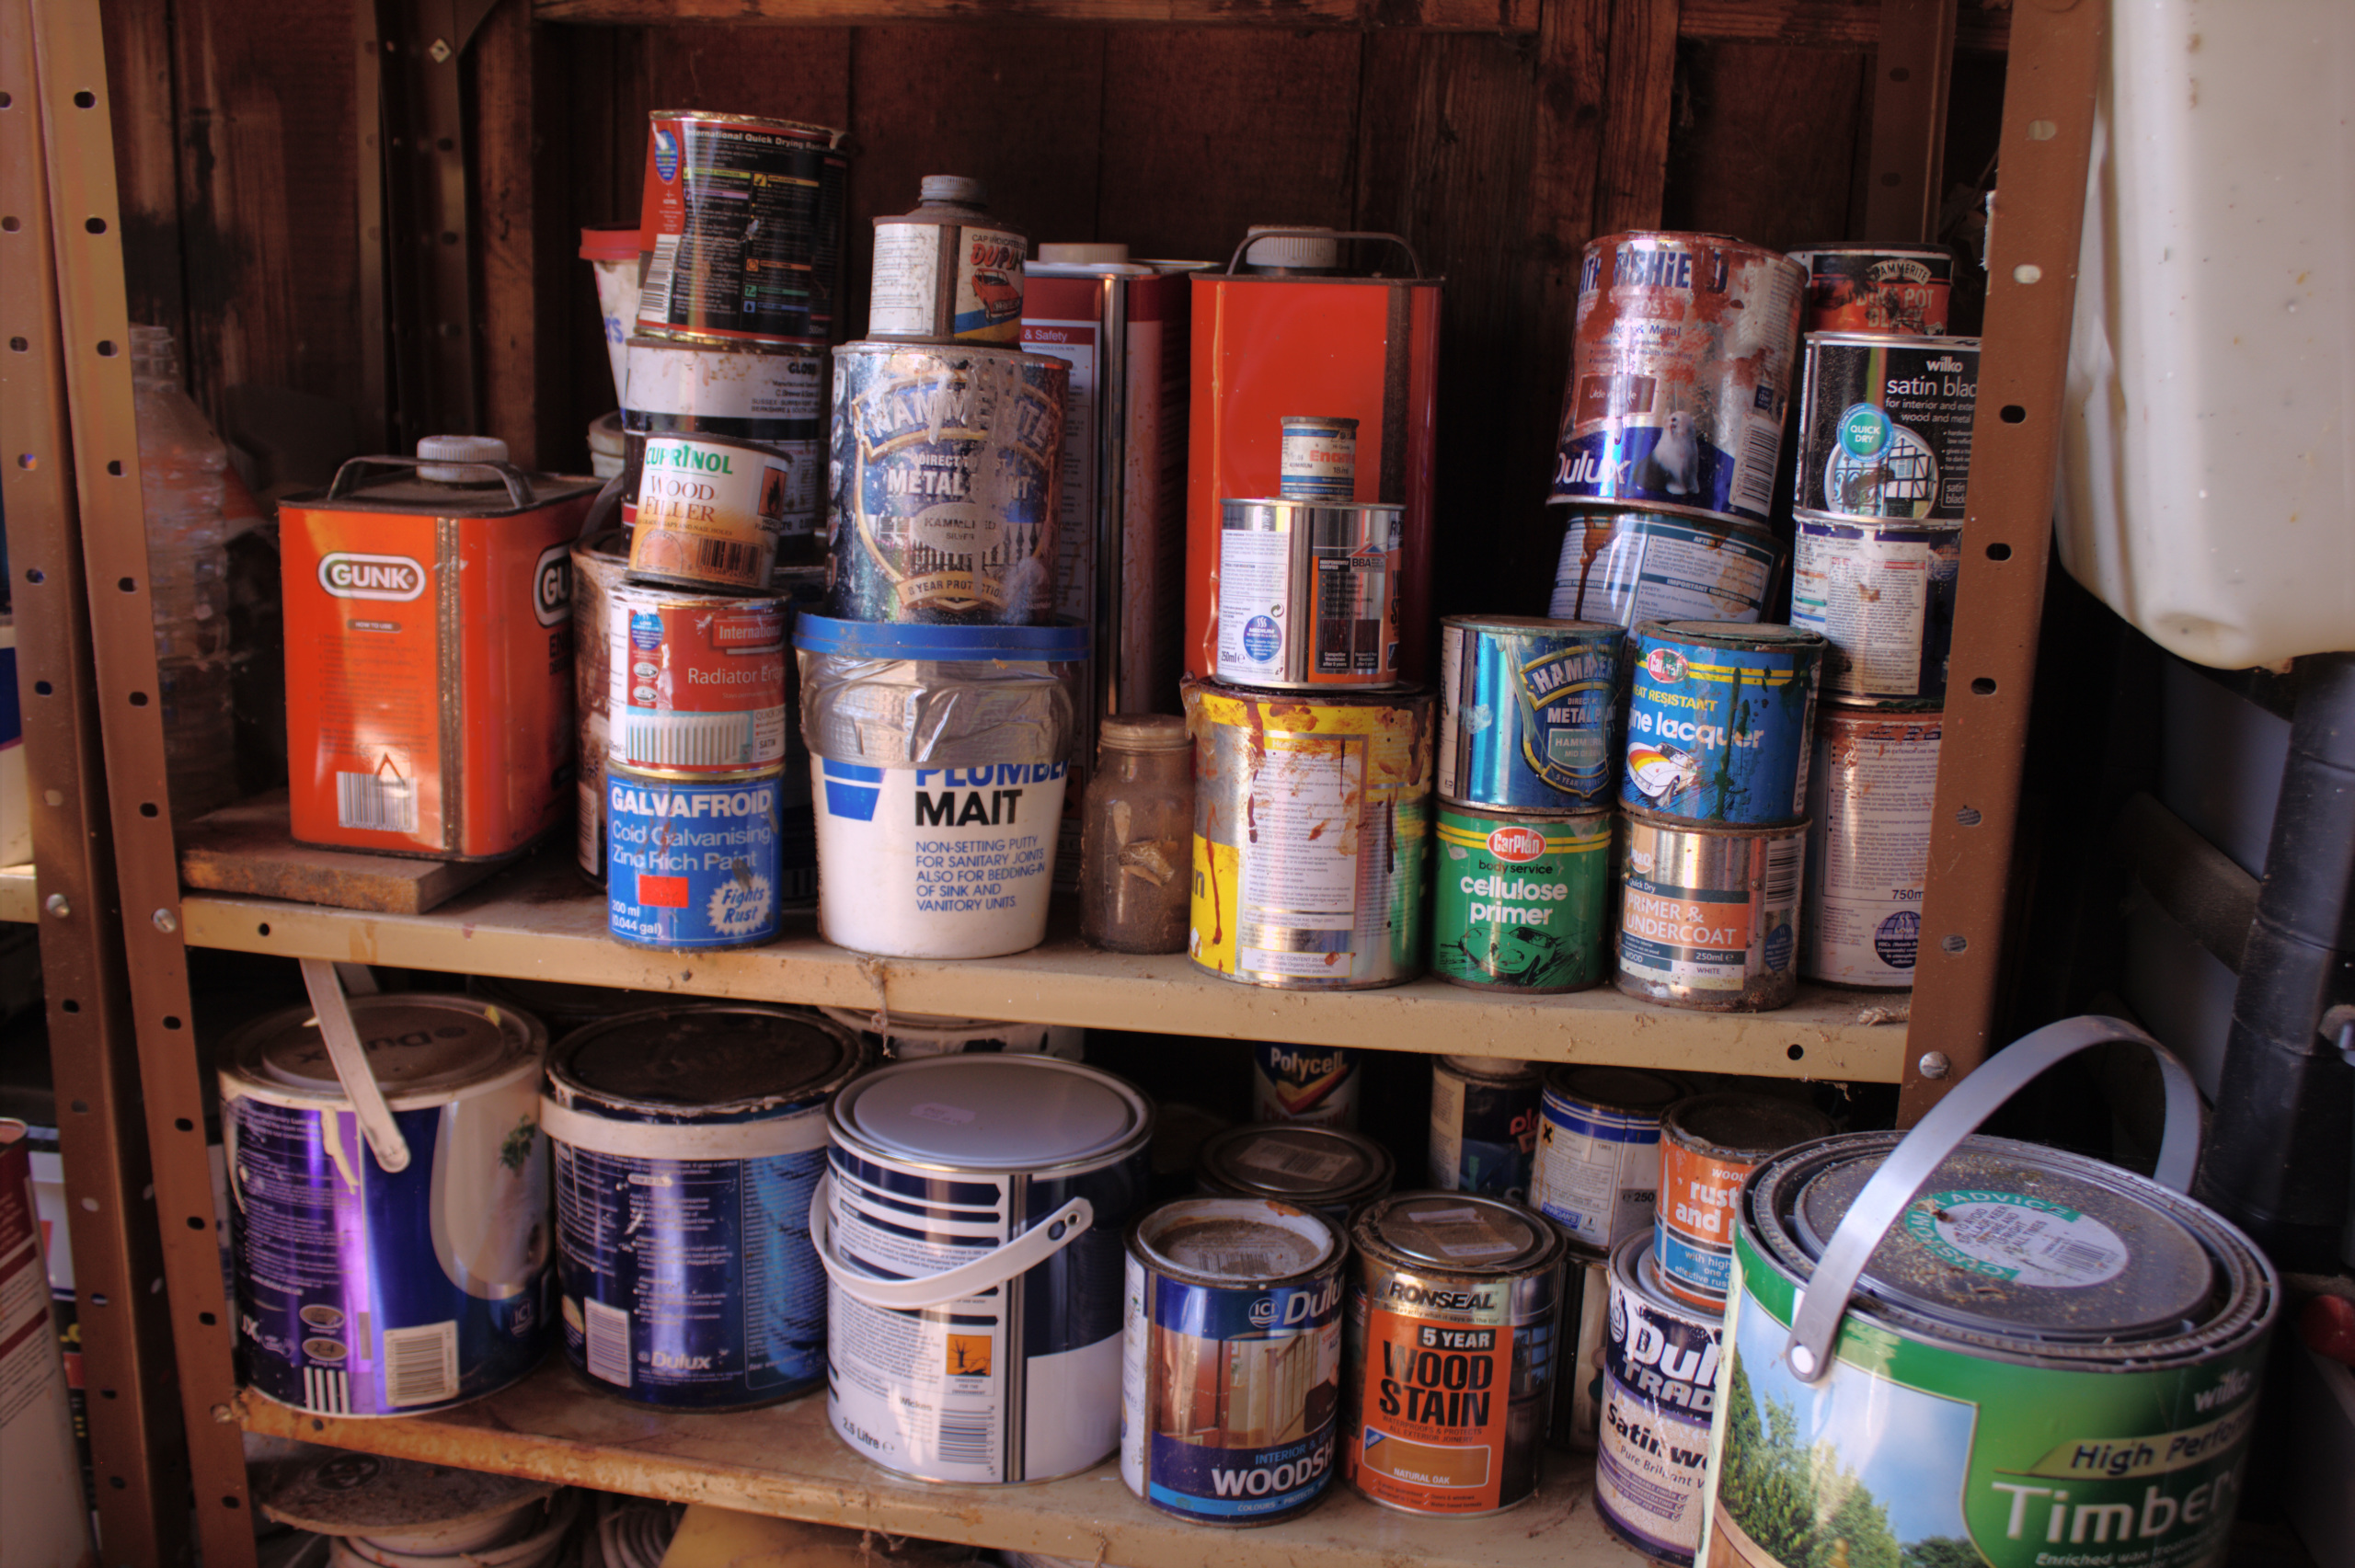 Cans of paint, wood stain and household chemicals on a wooden shelf.